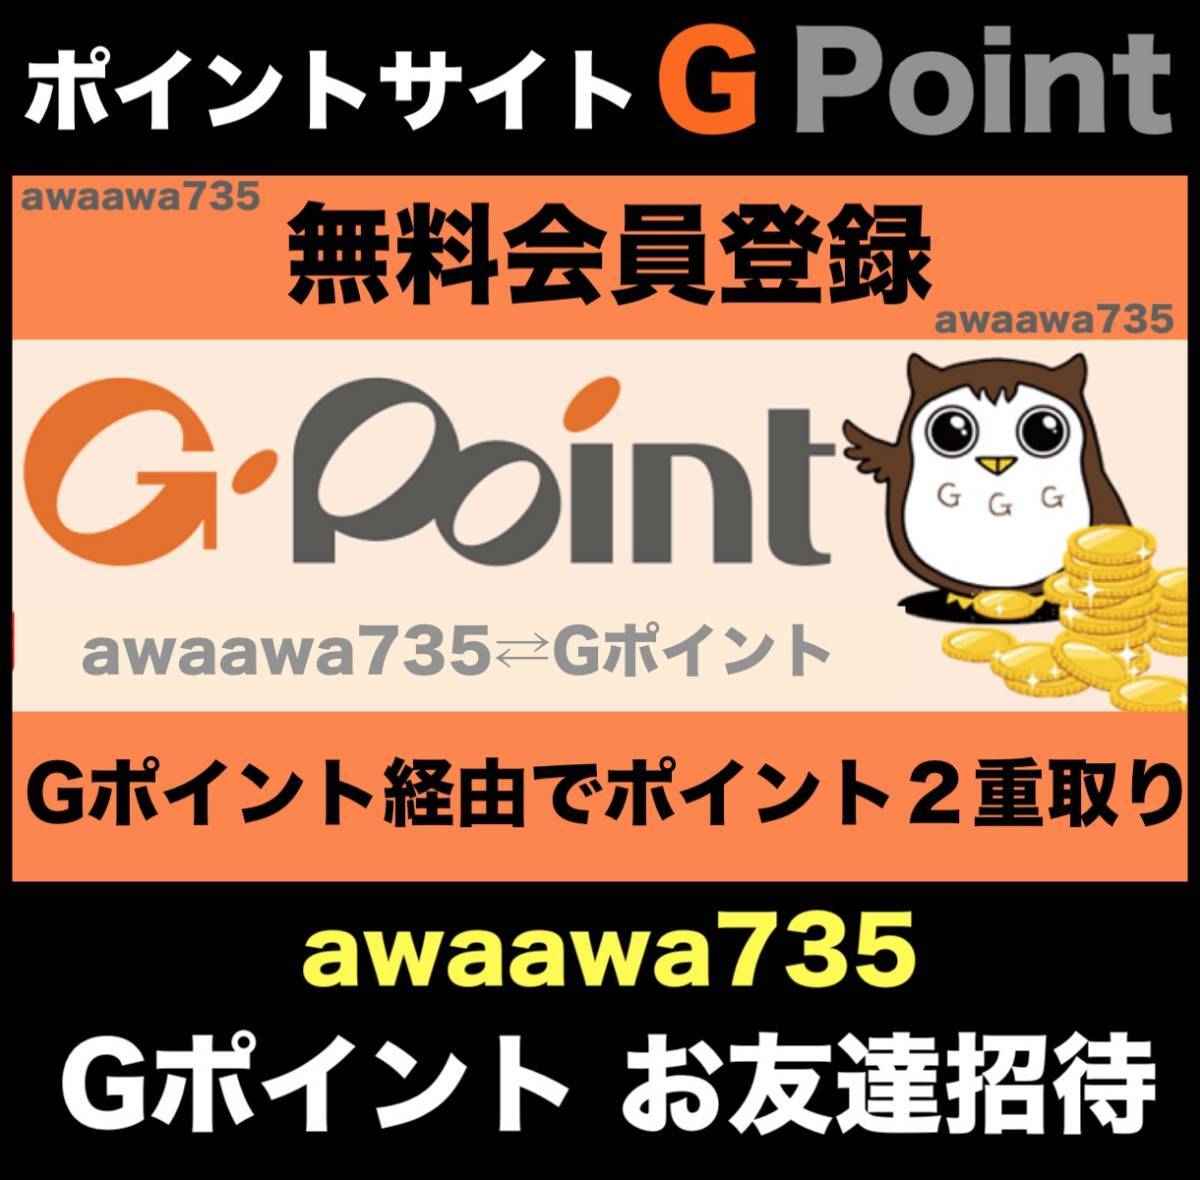 *[ safety safe height appraisal ] G Point ... invitation Point exchange site introduction URL new member registration BIGLOBE member profit information poi. my la-dPoint1 jpy 